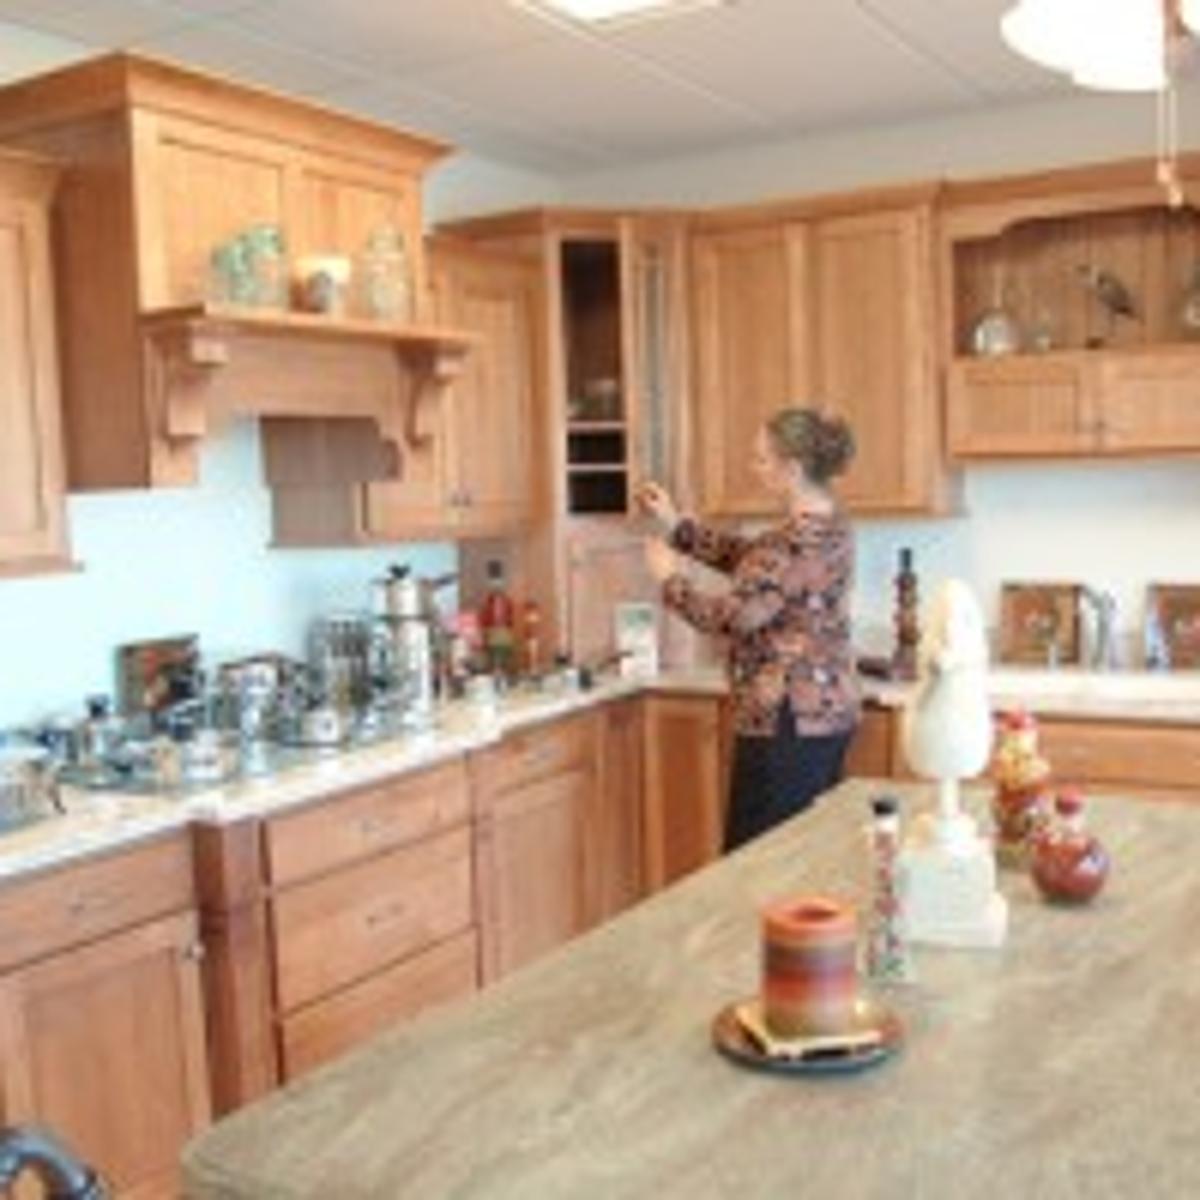 Kustom Kitchens Aims To Be More Than Cabinet Shop Local